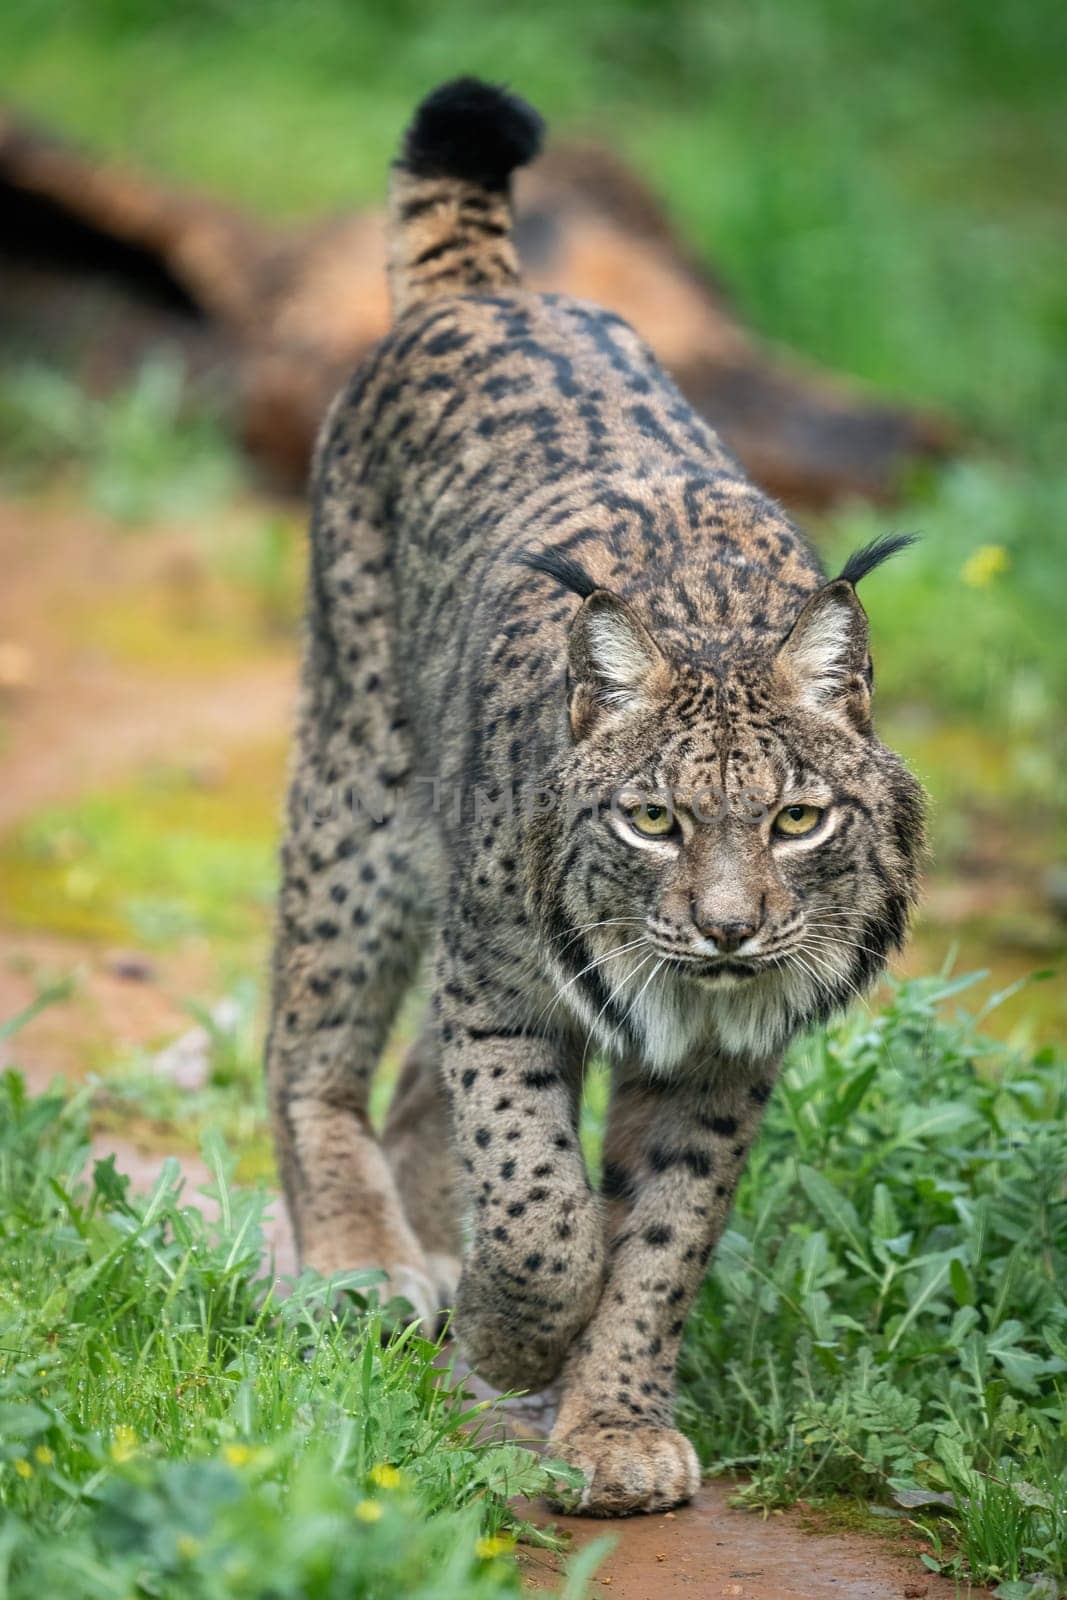 Intimate look at an Iberian Lynx, highlighting its distinctive allure in the wild.